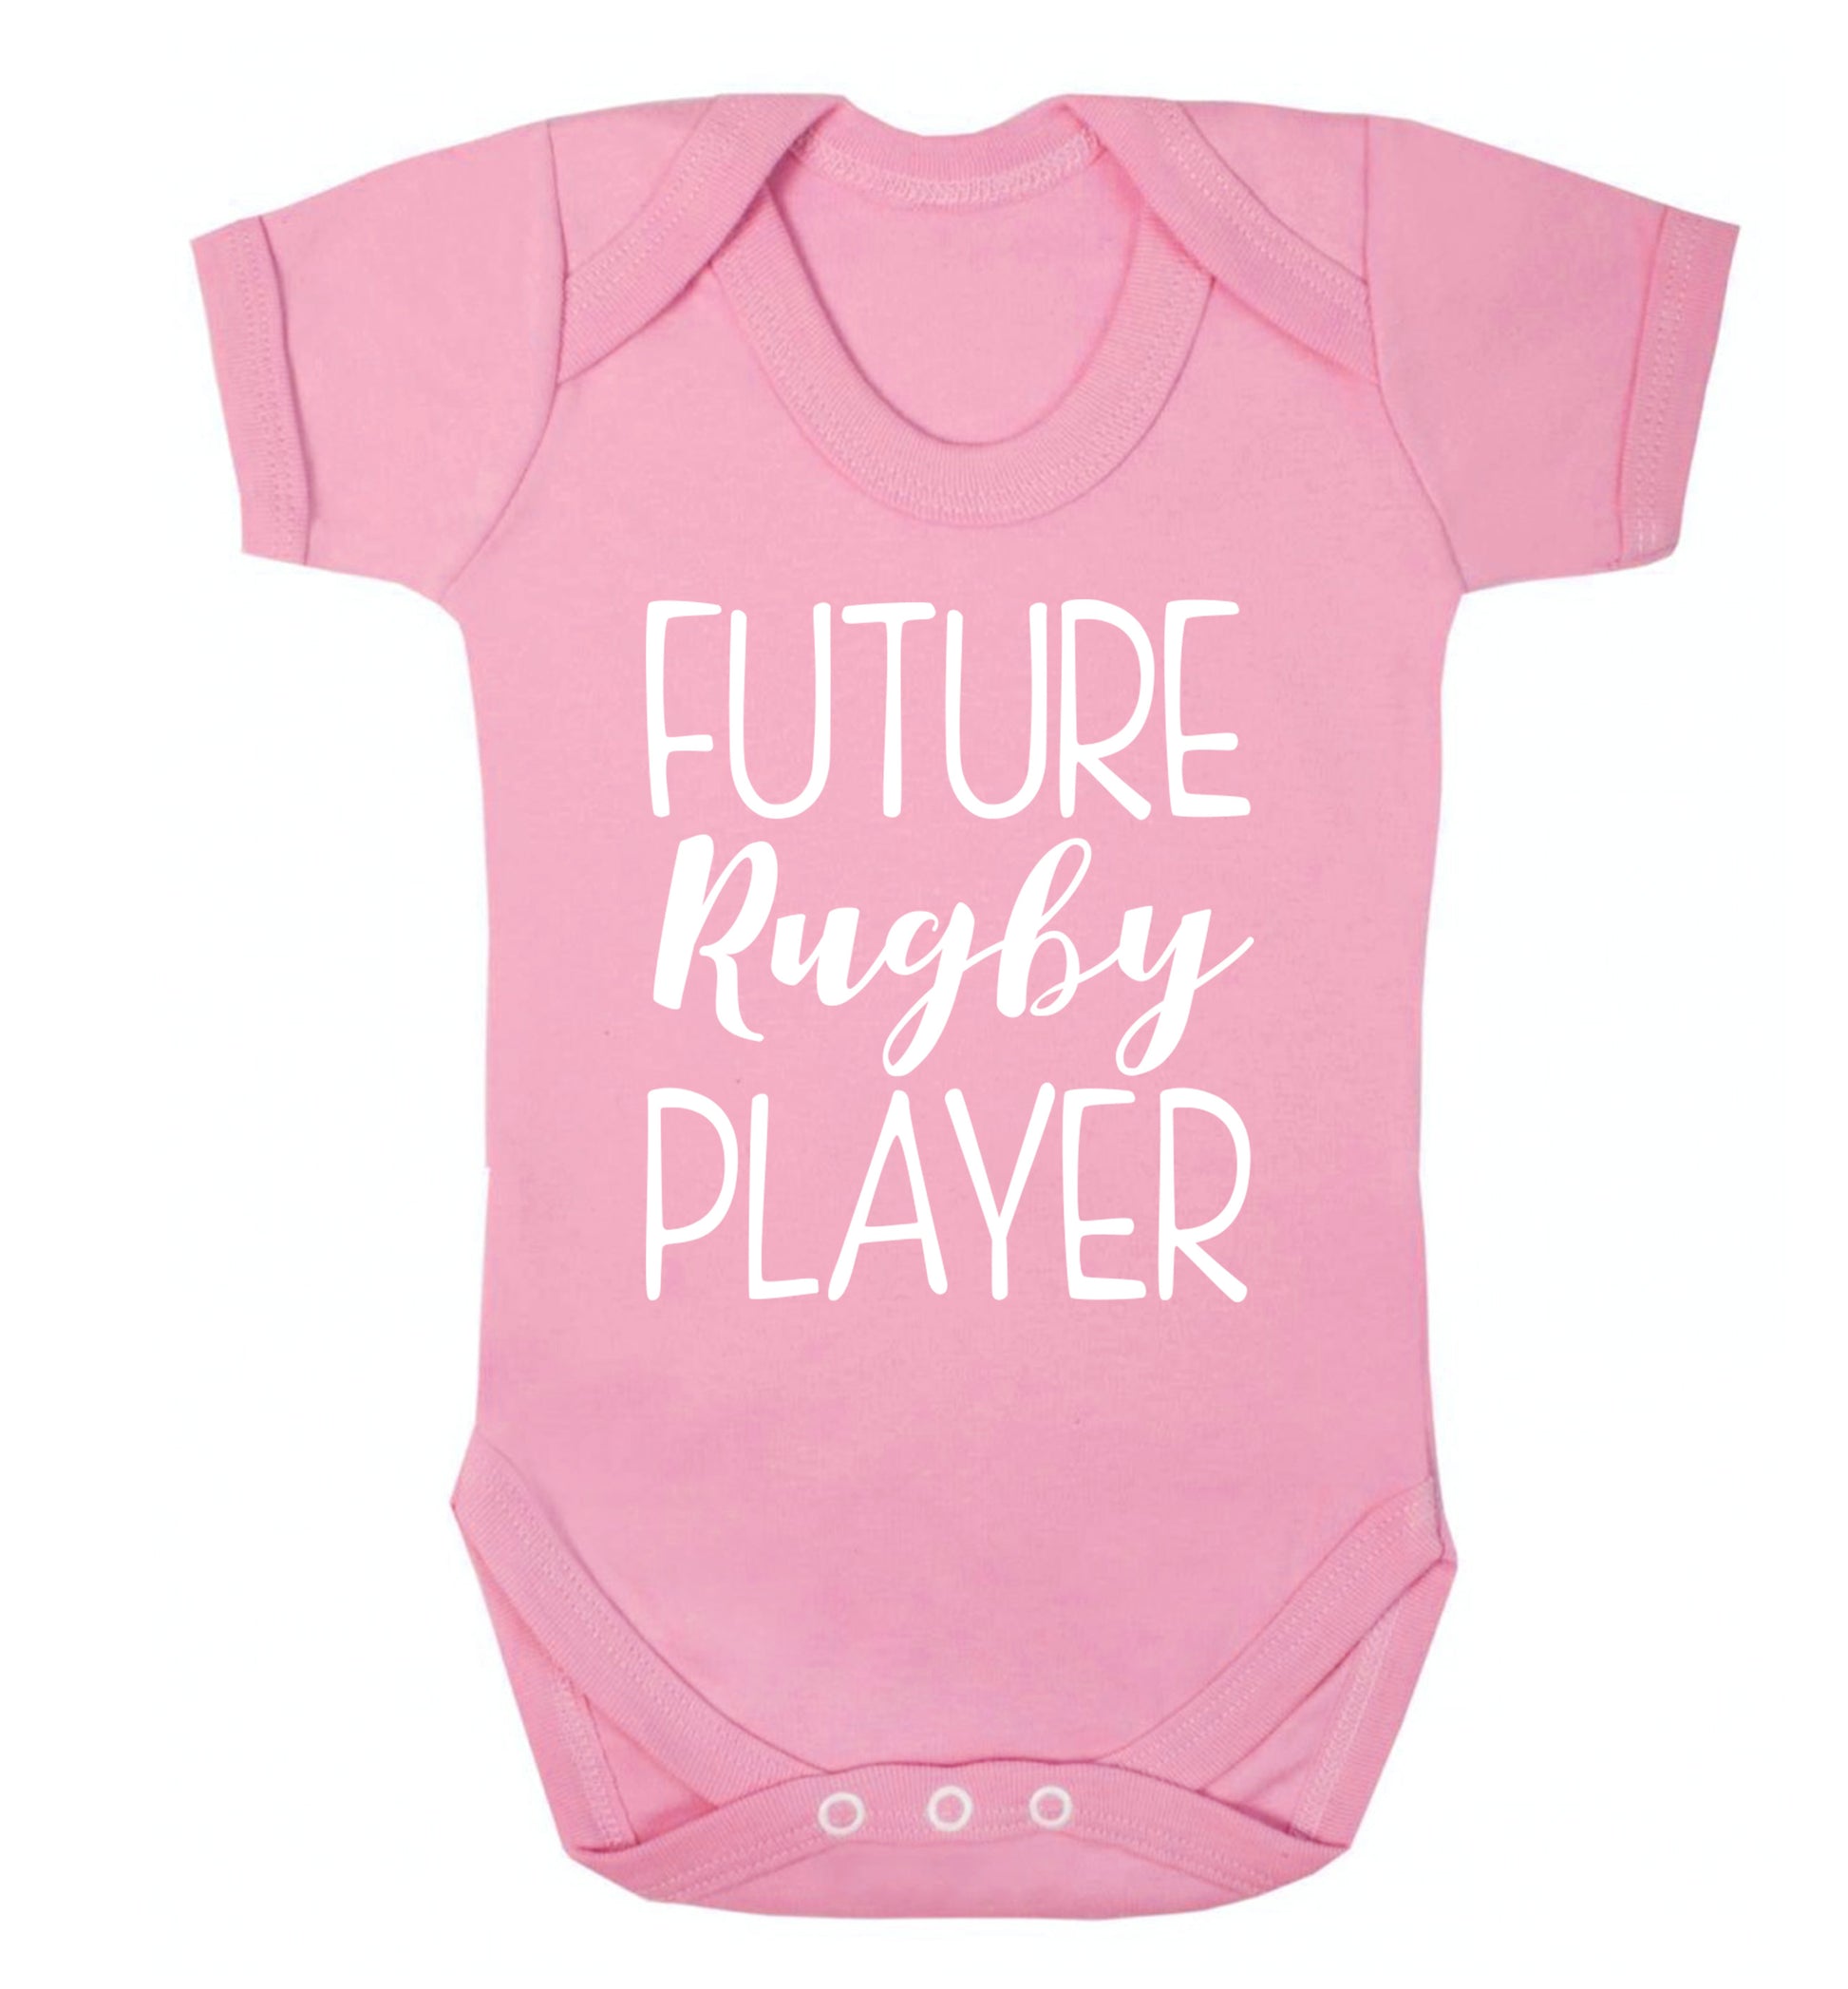 Future rugby player Baby Vest pale pink 18-24 months